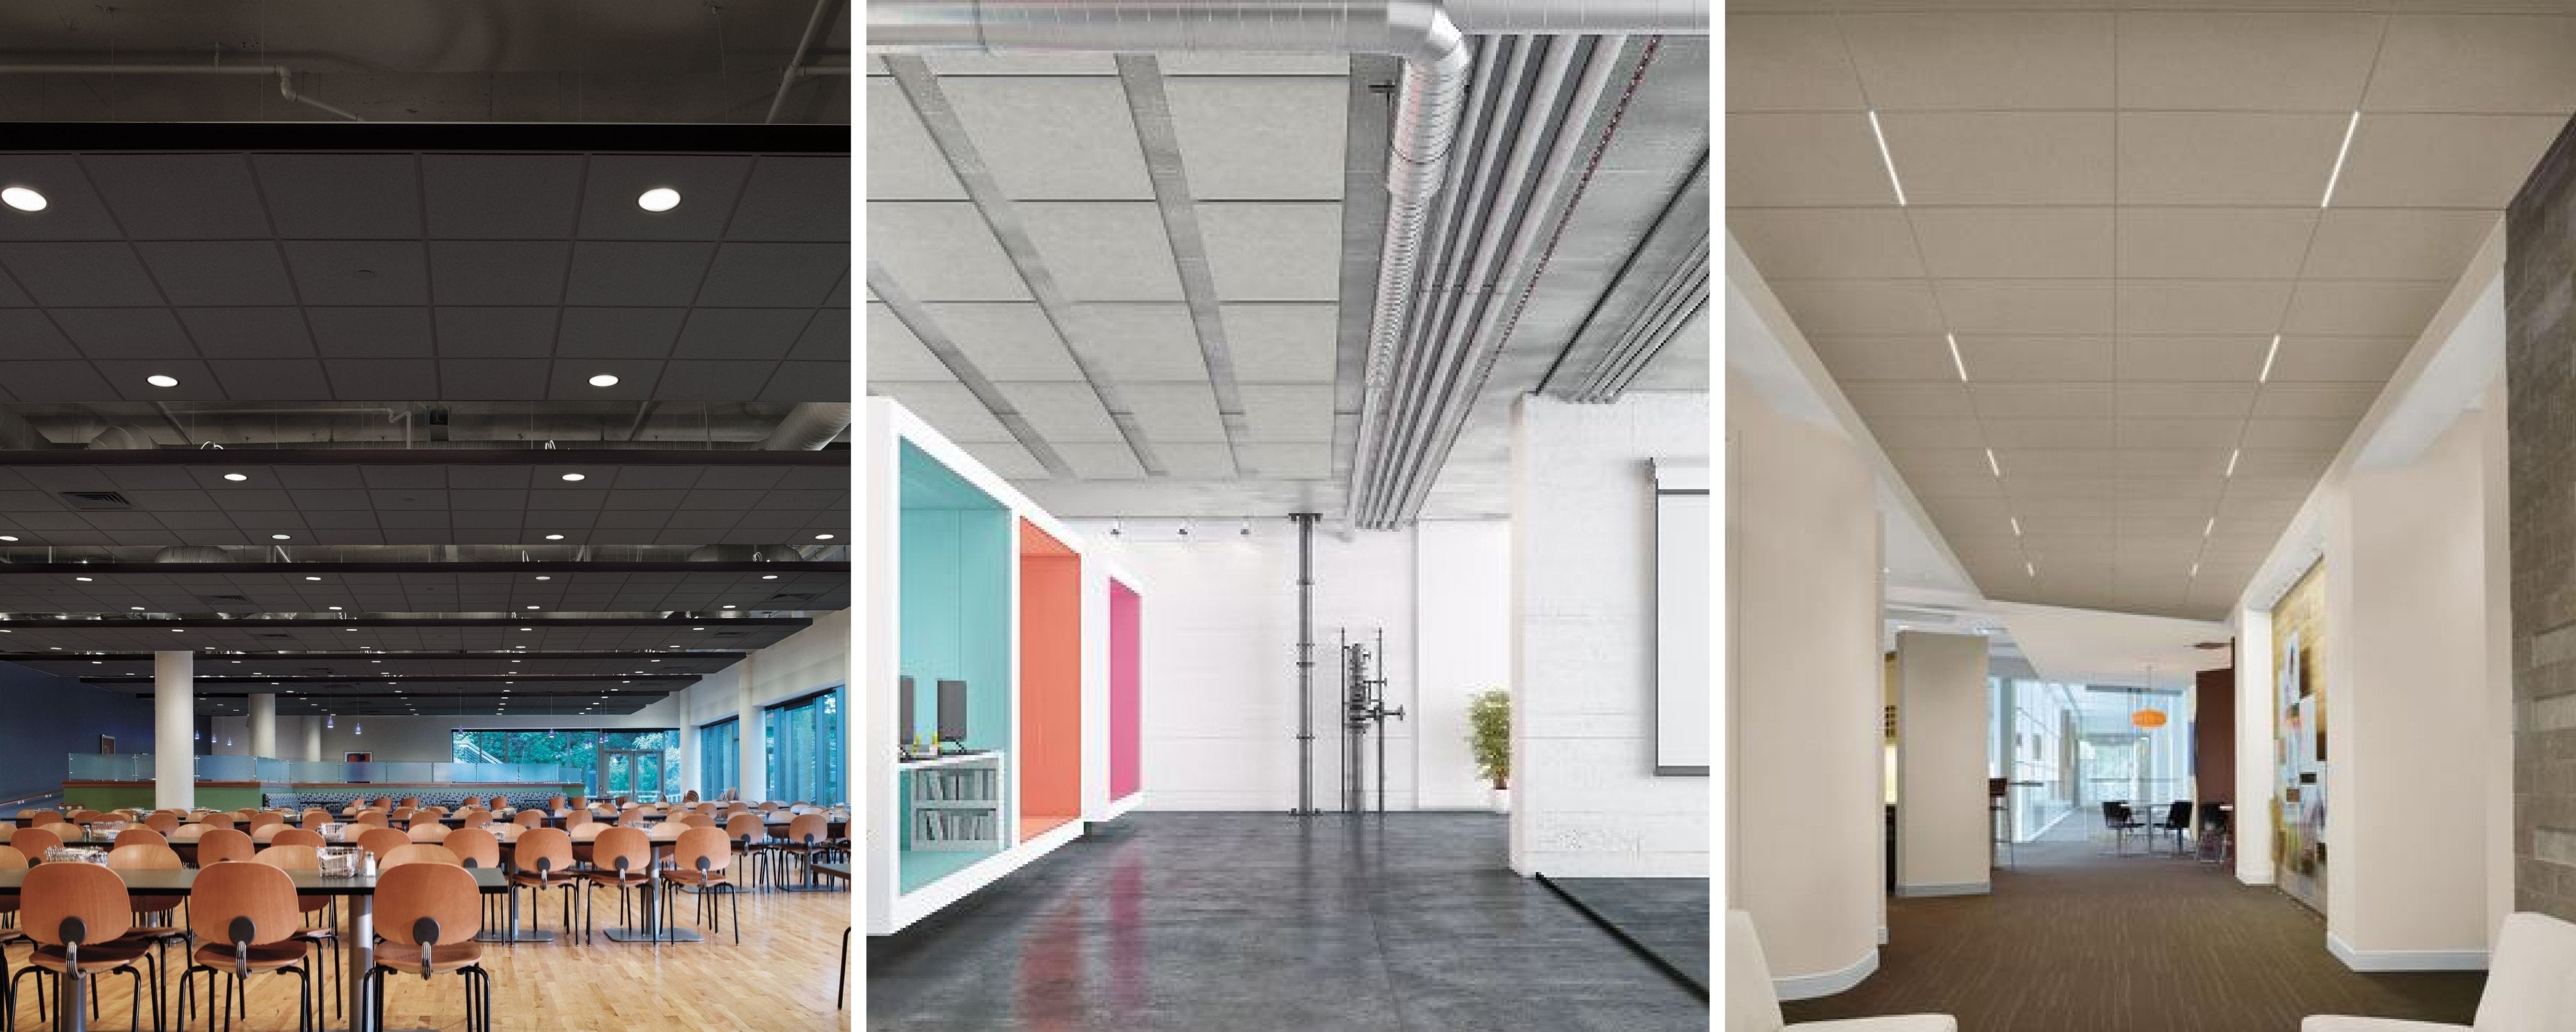 6 sleek ceiling tile colors for your commercial space